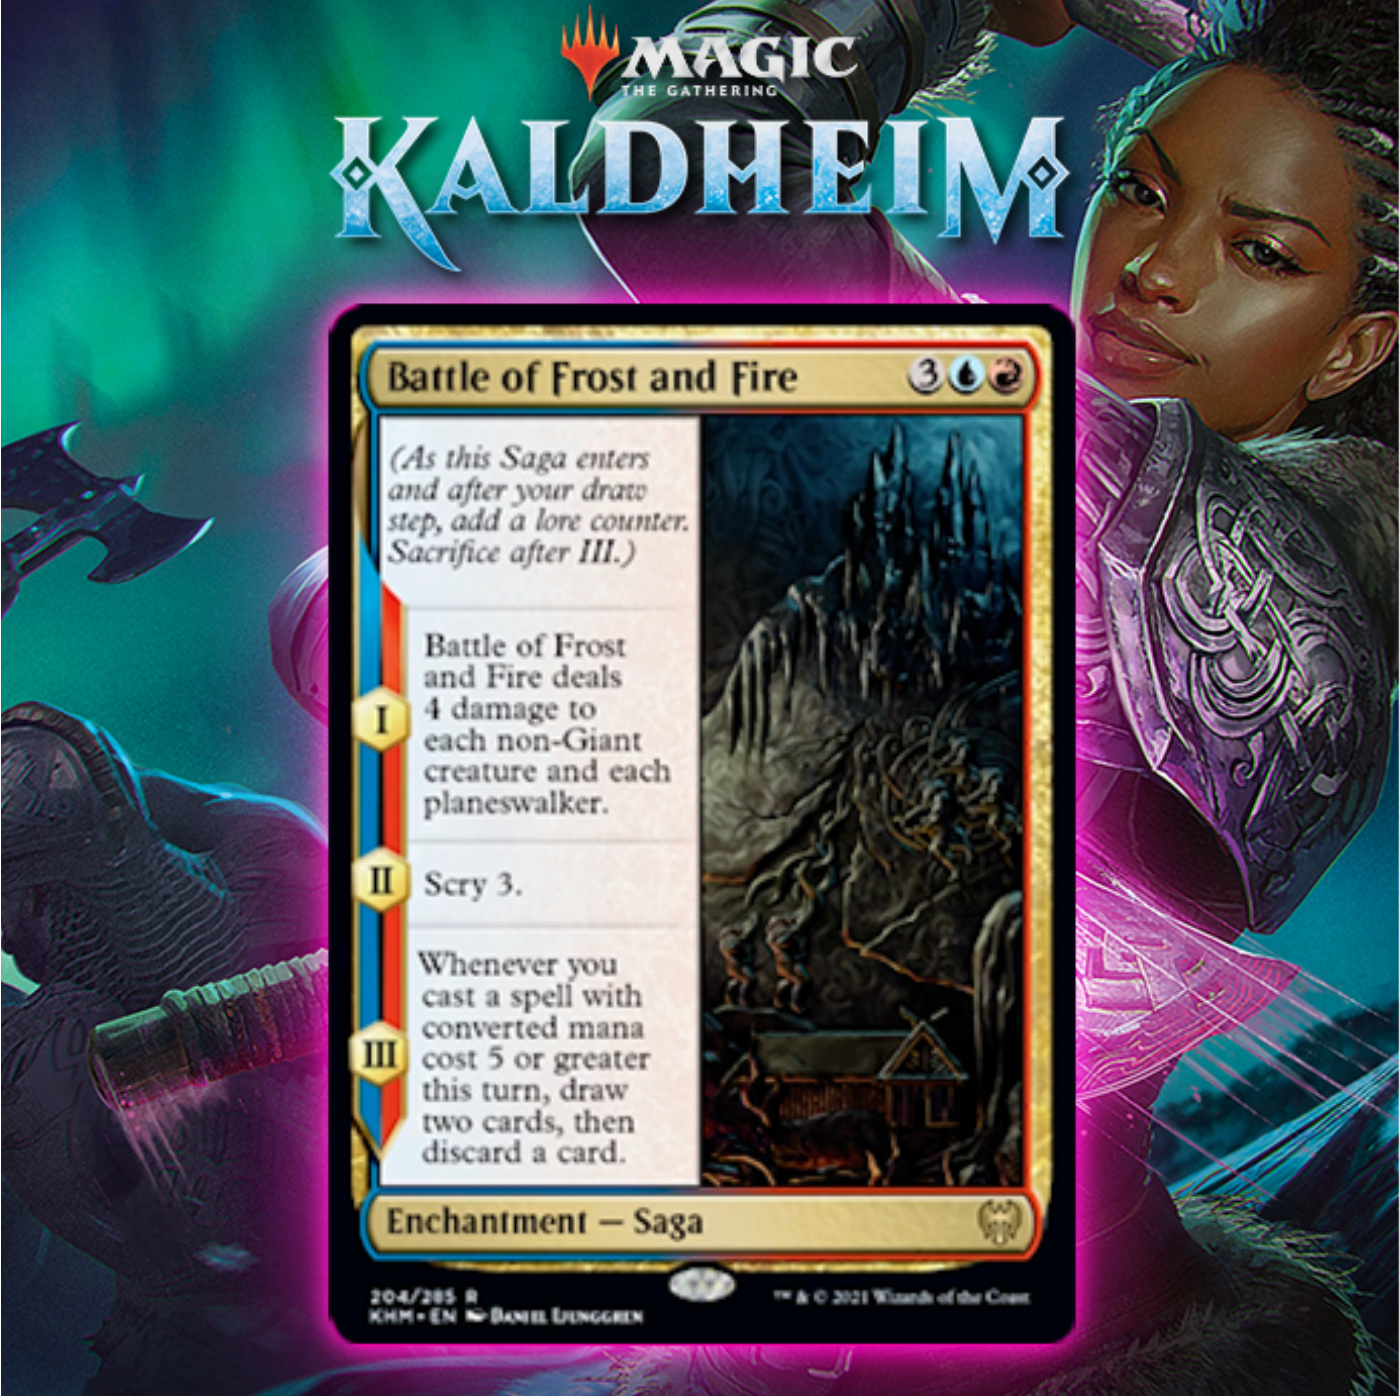 Izzet Gets Powerful Saga In Battle of Frost and Fire In Kaldheim